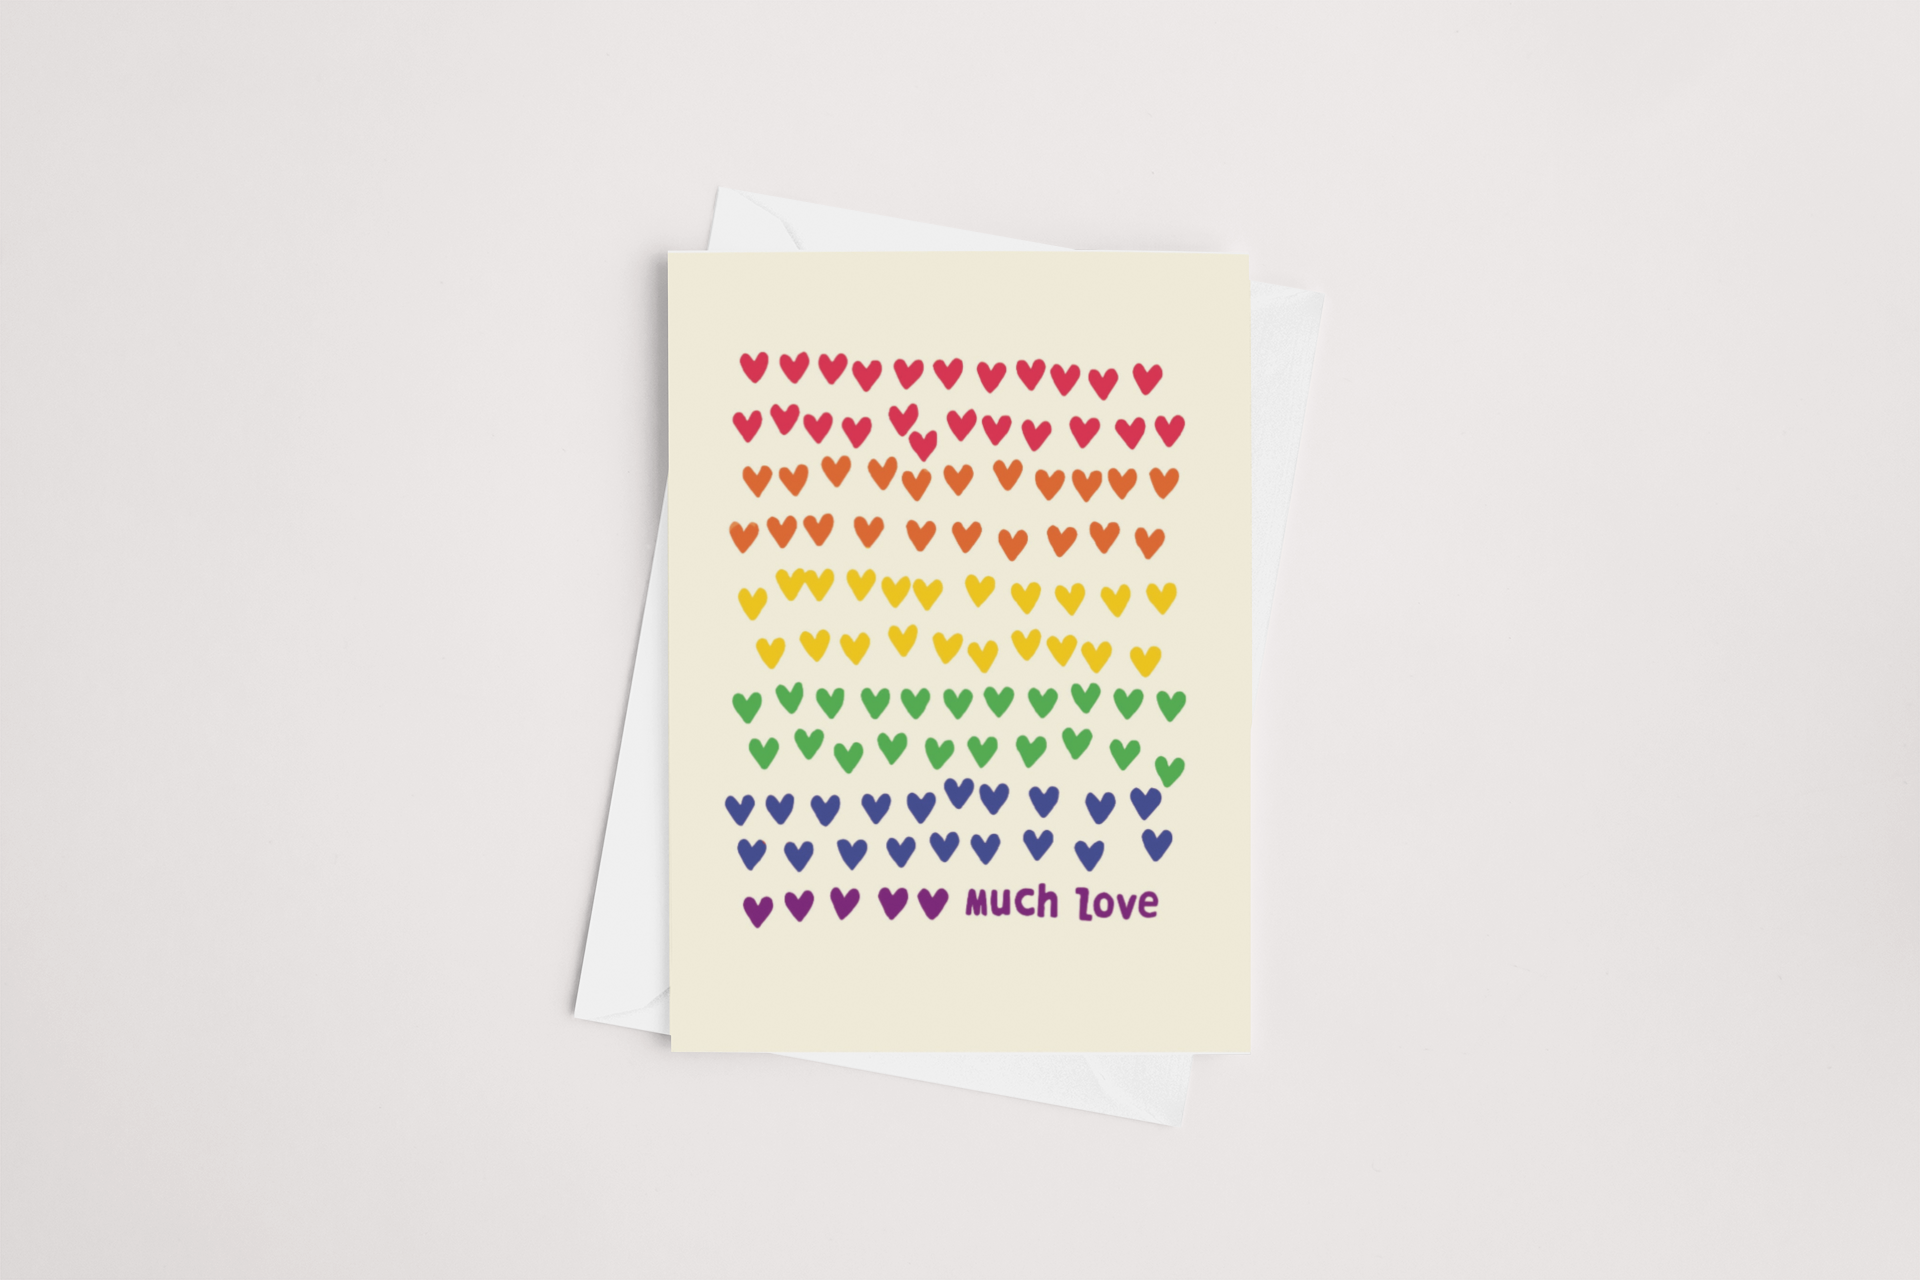 A cheerful Rainbow Hearts Card by Tuesday Print featuring rows of colorful hearts in a rainbow spectrum with the words "much love" at the bottom, accompanied by a white envelope against a clean, white background. This delightful multib